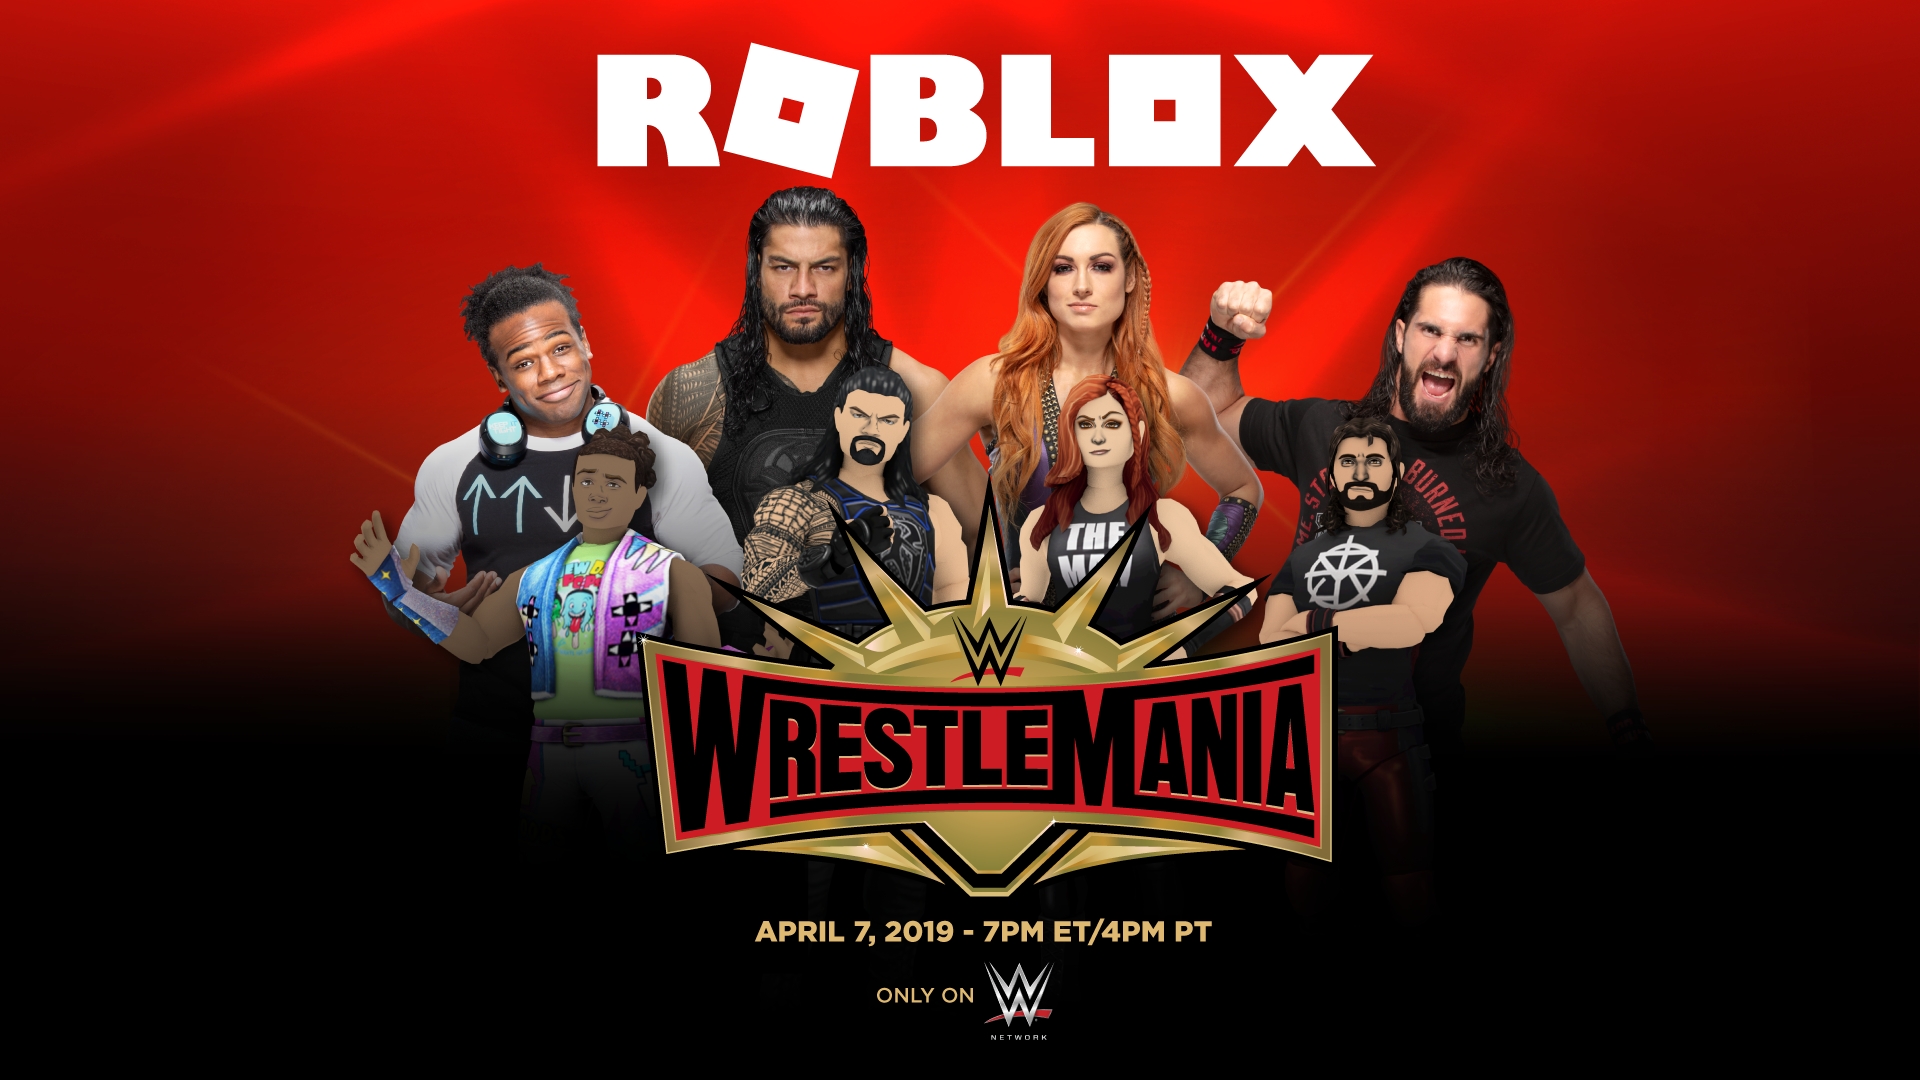 Roblox And Wwe Partner To Celebrate Wrestlemania Business Wire - roblox and wwe partner to celebrate wrestlemania business wire